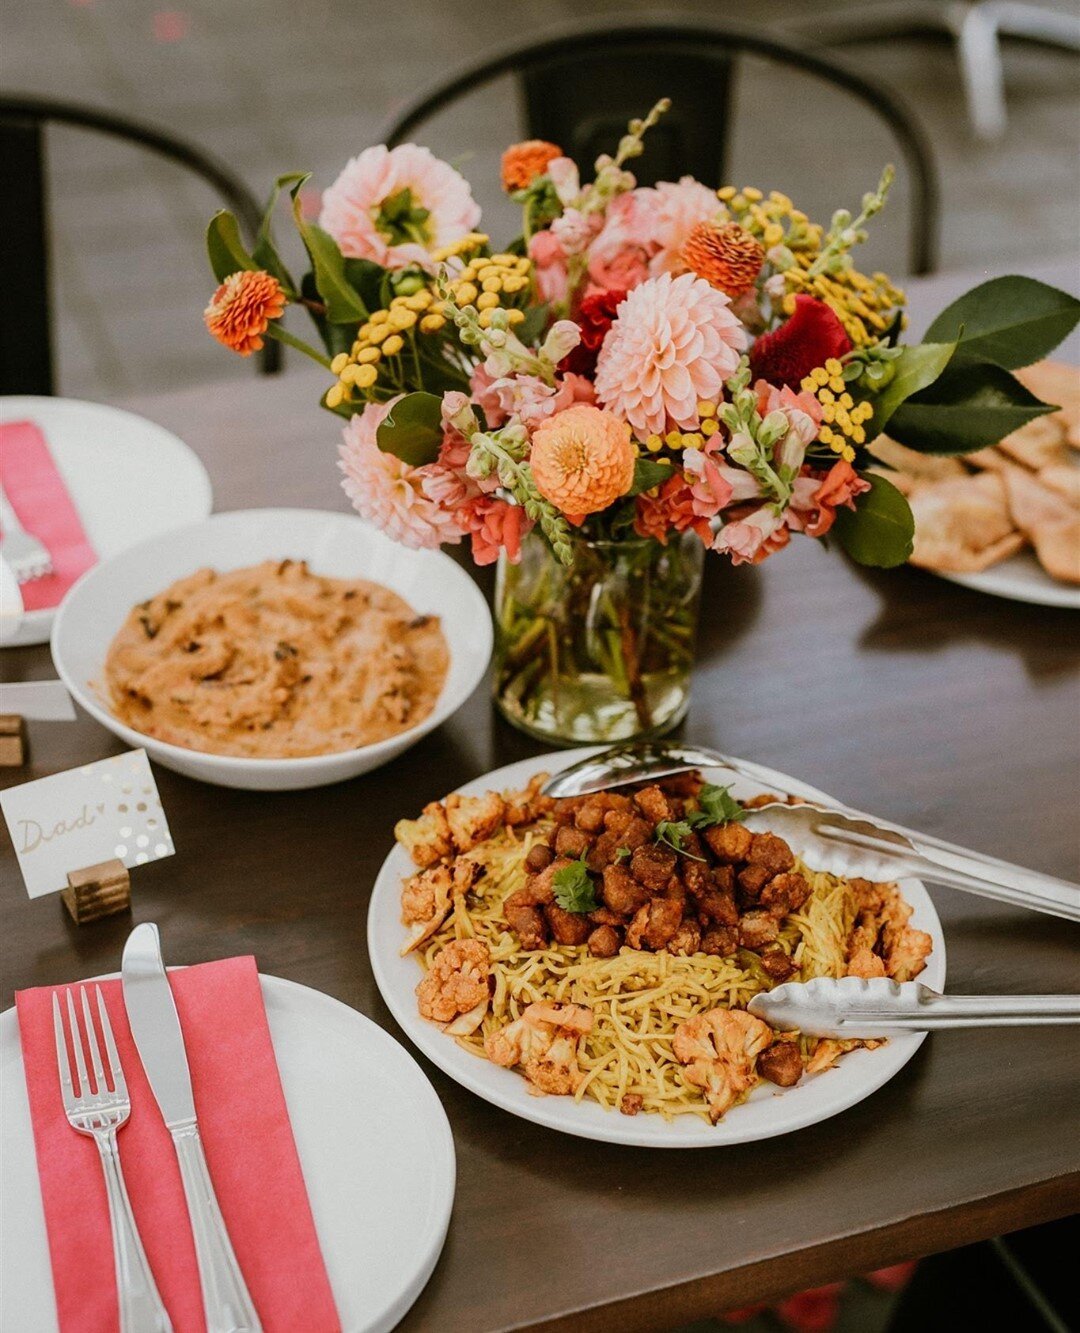 Hosting a picnic in the park? Throwing a baby shower? Surprising a friend for their birthday? Whatever the occasion, we're here to help!⁠
⁠
From weddings and anniversaries to birthday celebrations and corporate gatherings, no event is too big or smal